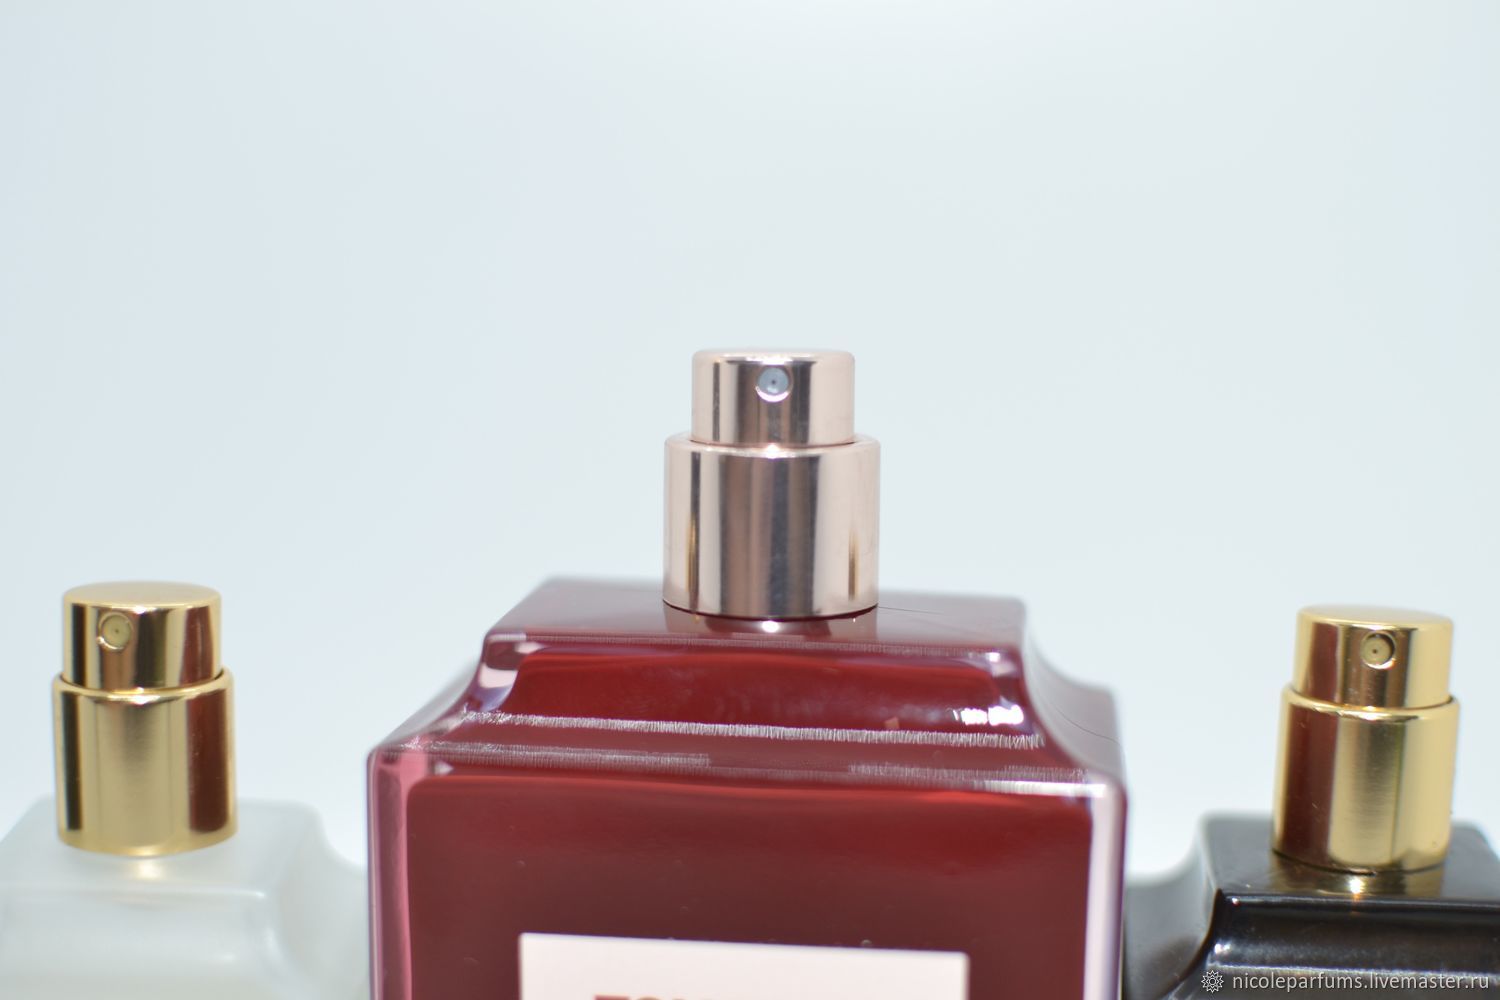 Tom ford lost cherry 50. Духи Tom Ford Lost Cherry. Tom Ford Lost Cherry оригинал. Аромат Tom Ford Cherry. Духи Tom Ford Lost Cherry оригинал.